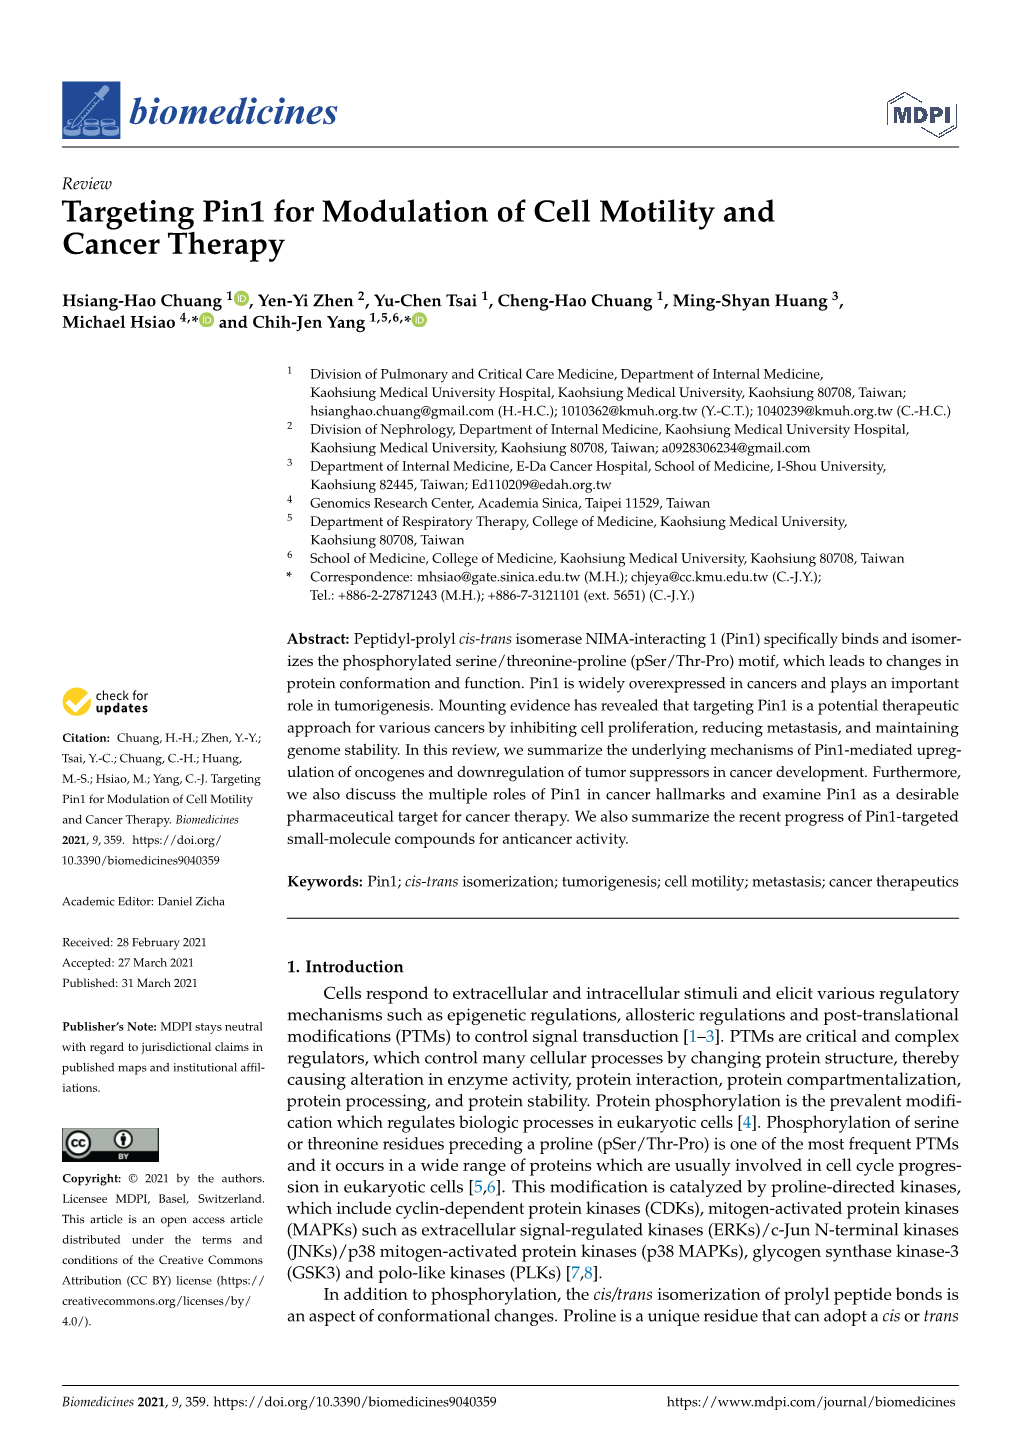 Targeting Pin1 for Modulation of Cell Motility and Cancer Therapy